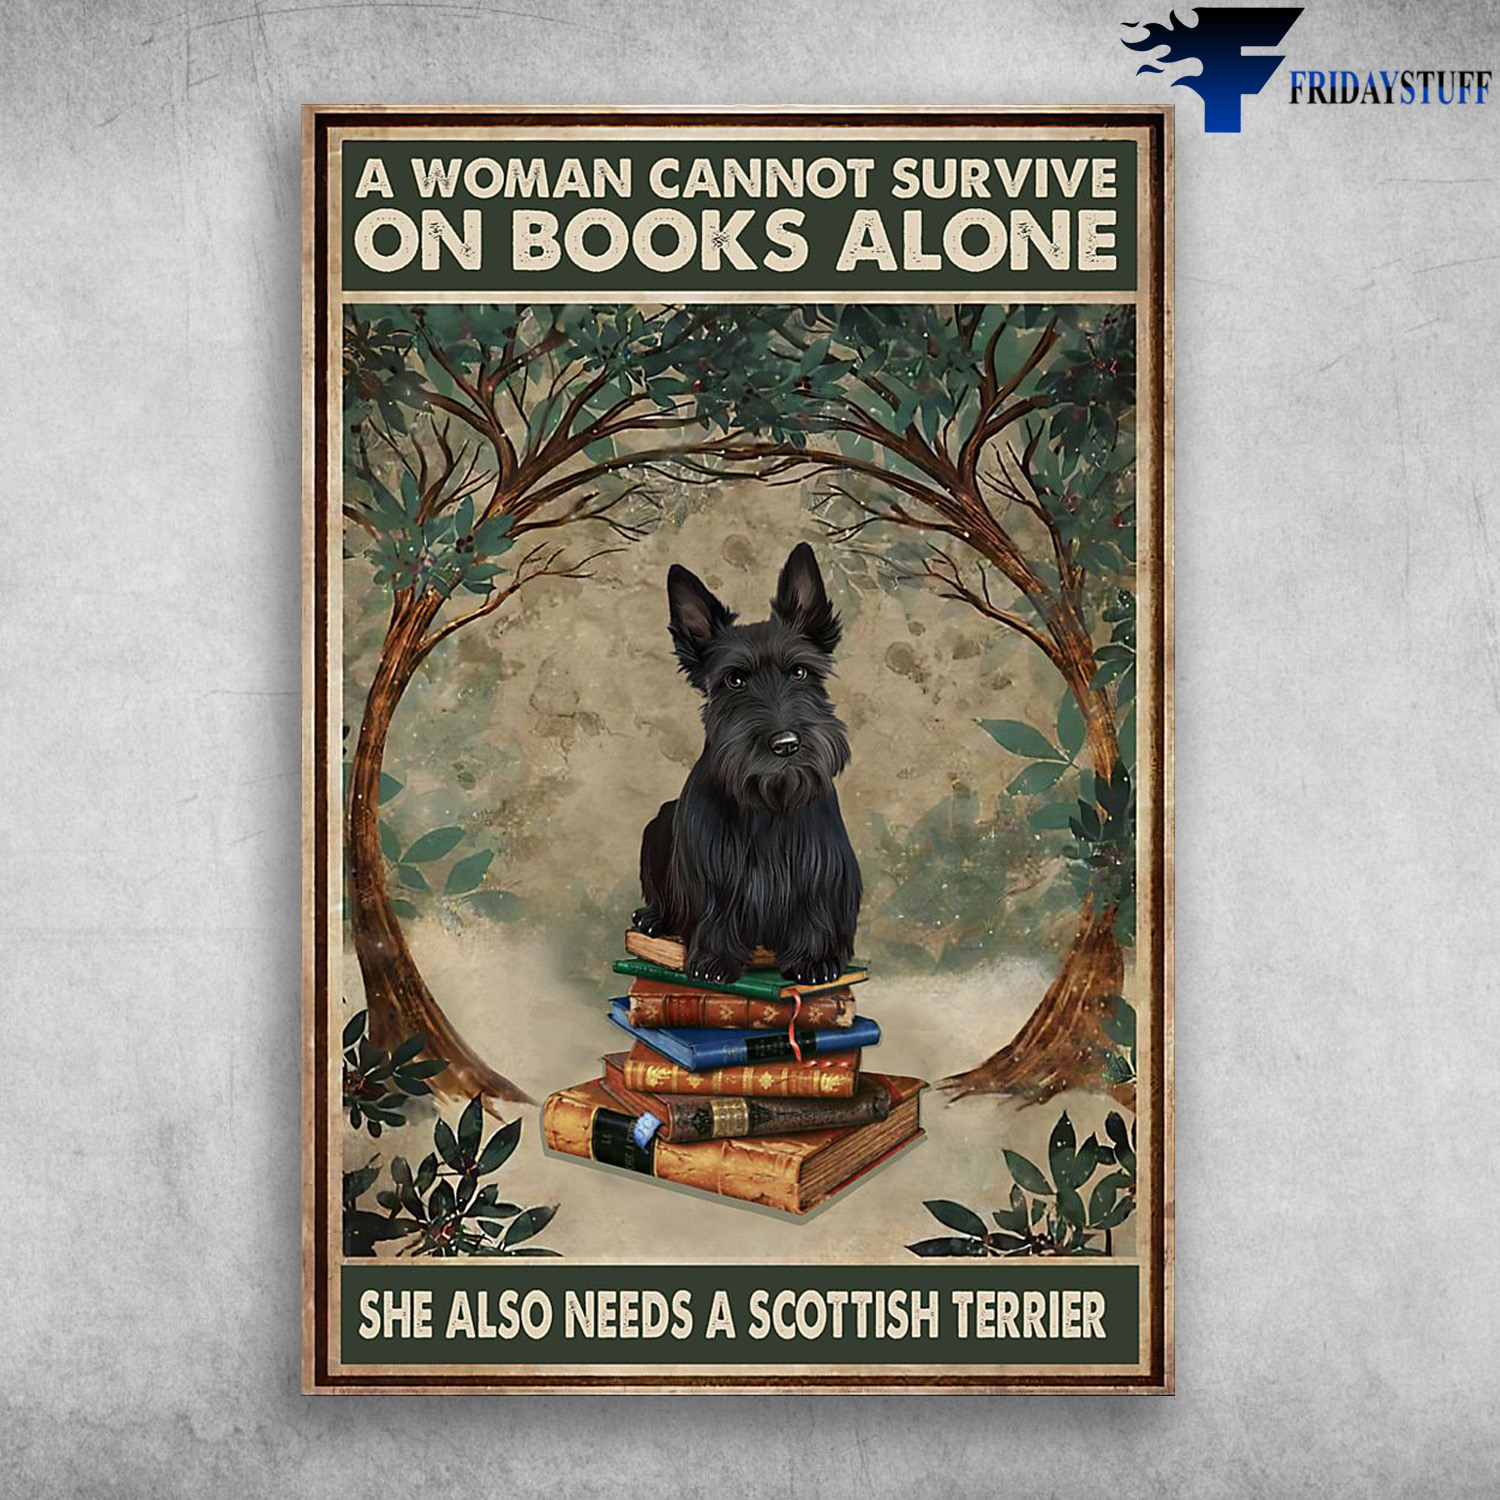 Scottish Terrier And Books - A Woman Cannot Survive, On Books Alone, She Also Needs A Scottish Terrier